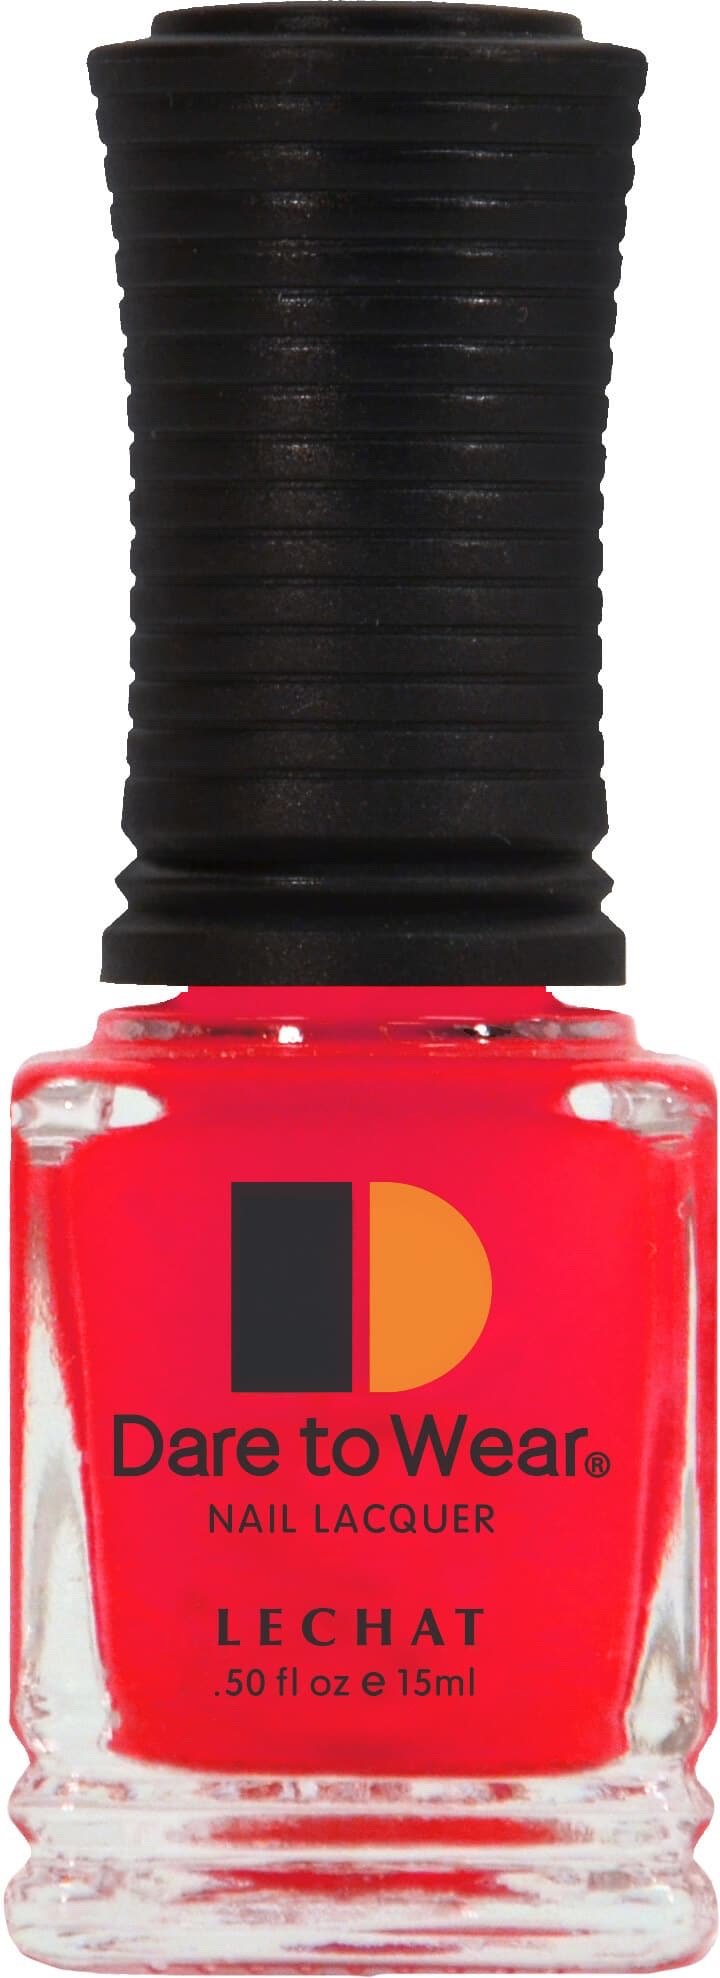 LeChat Dare to Wear Nail Polish - Pink Clarity